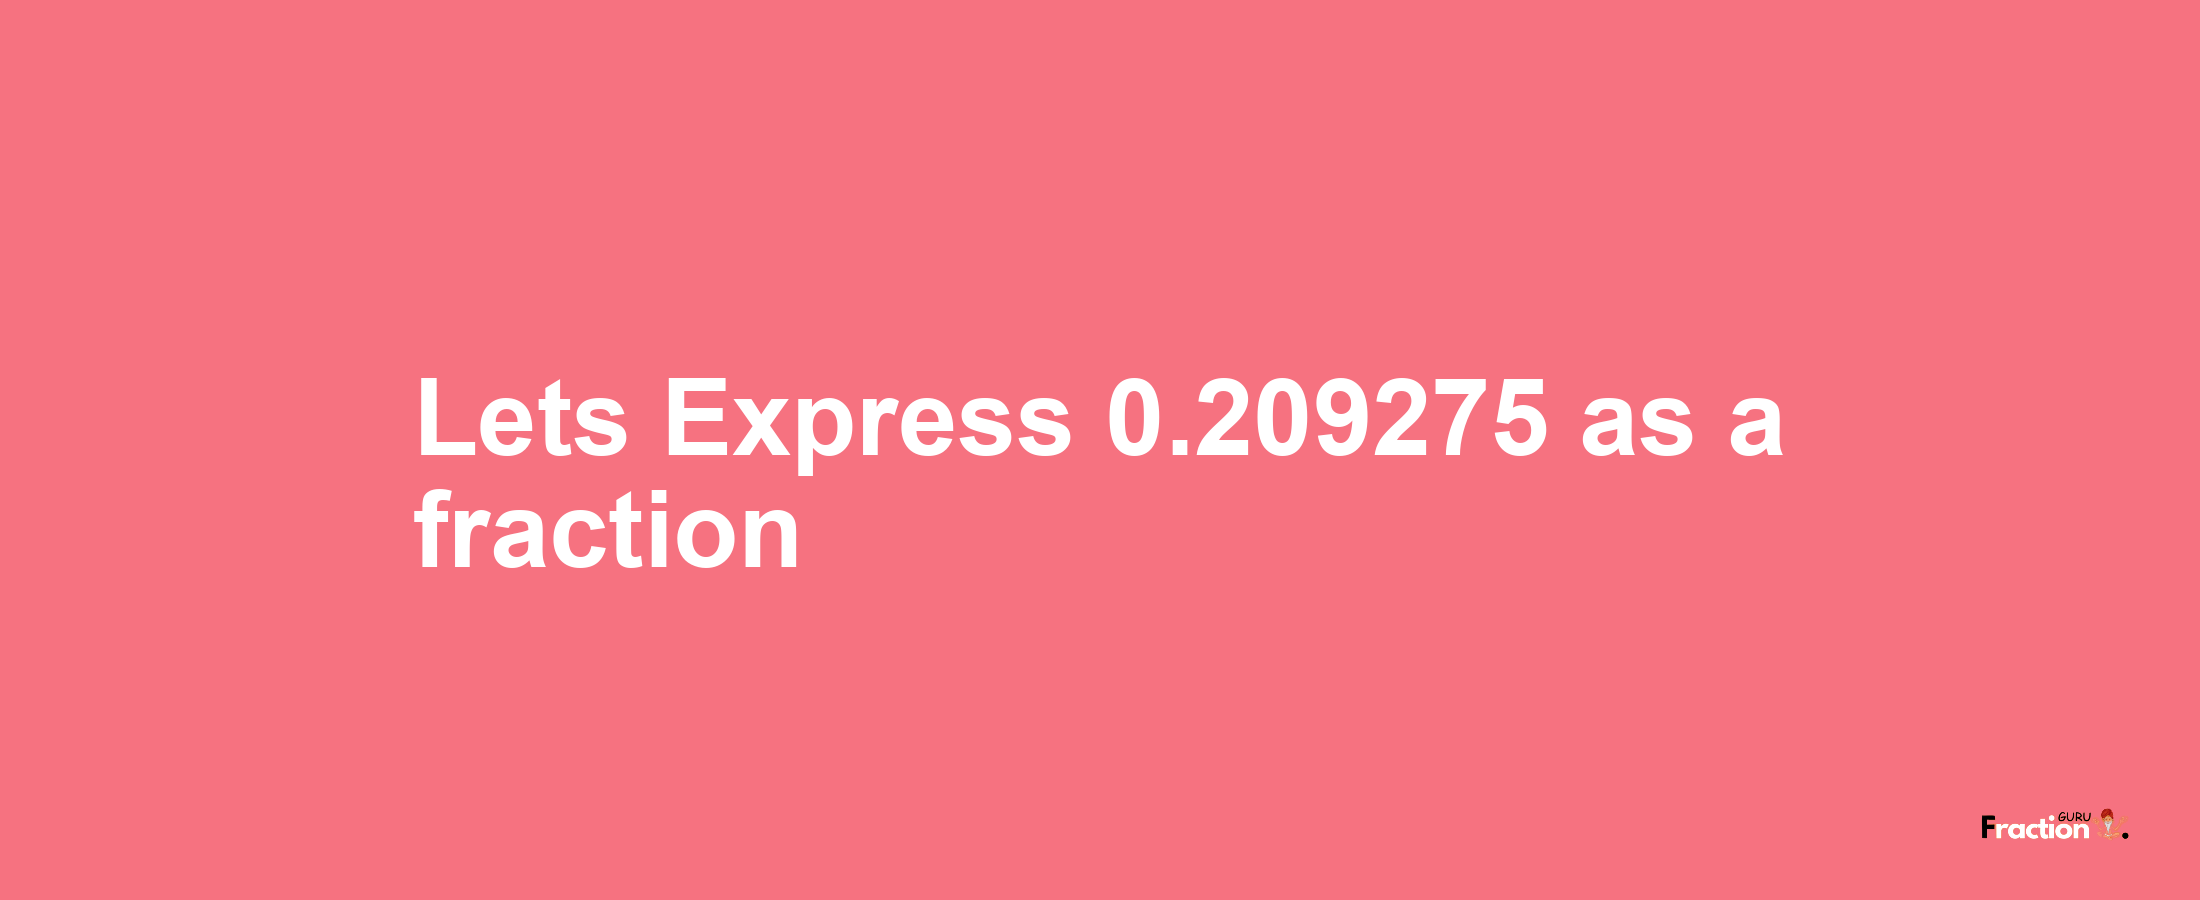 Lets Express 0.209275 as afraction